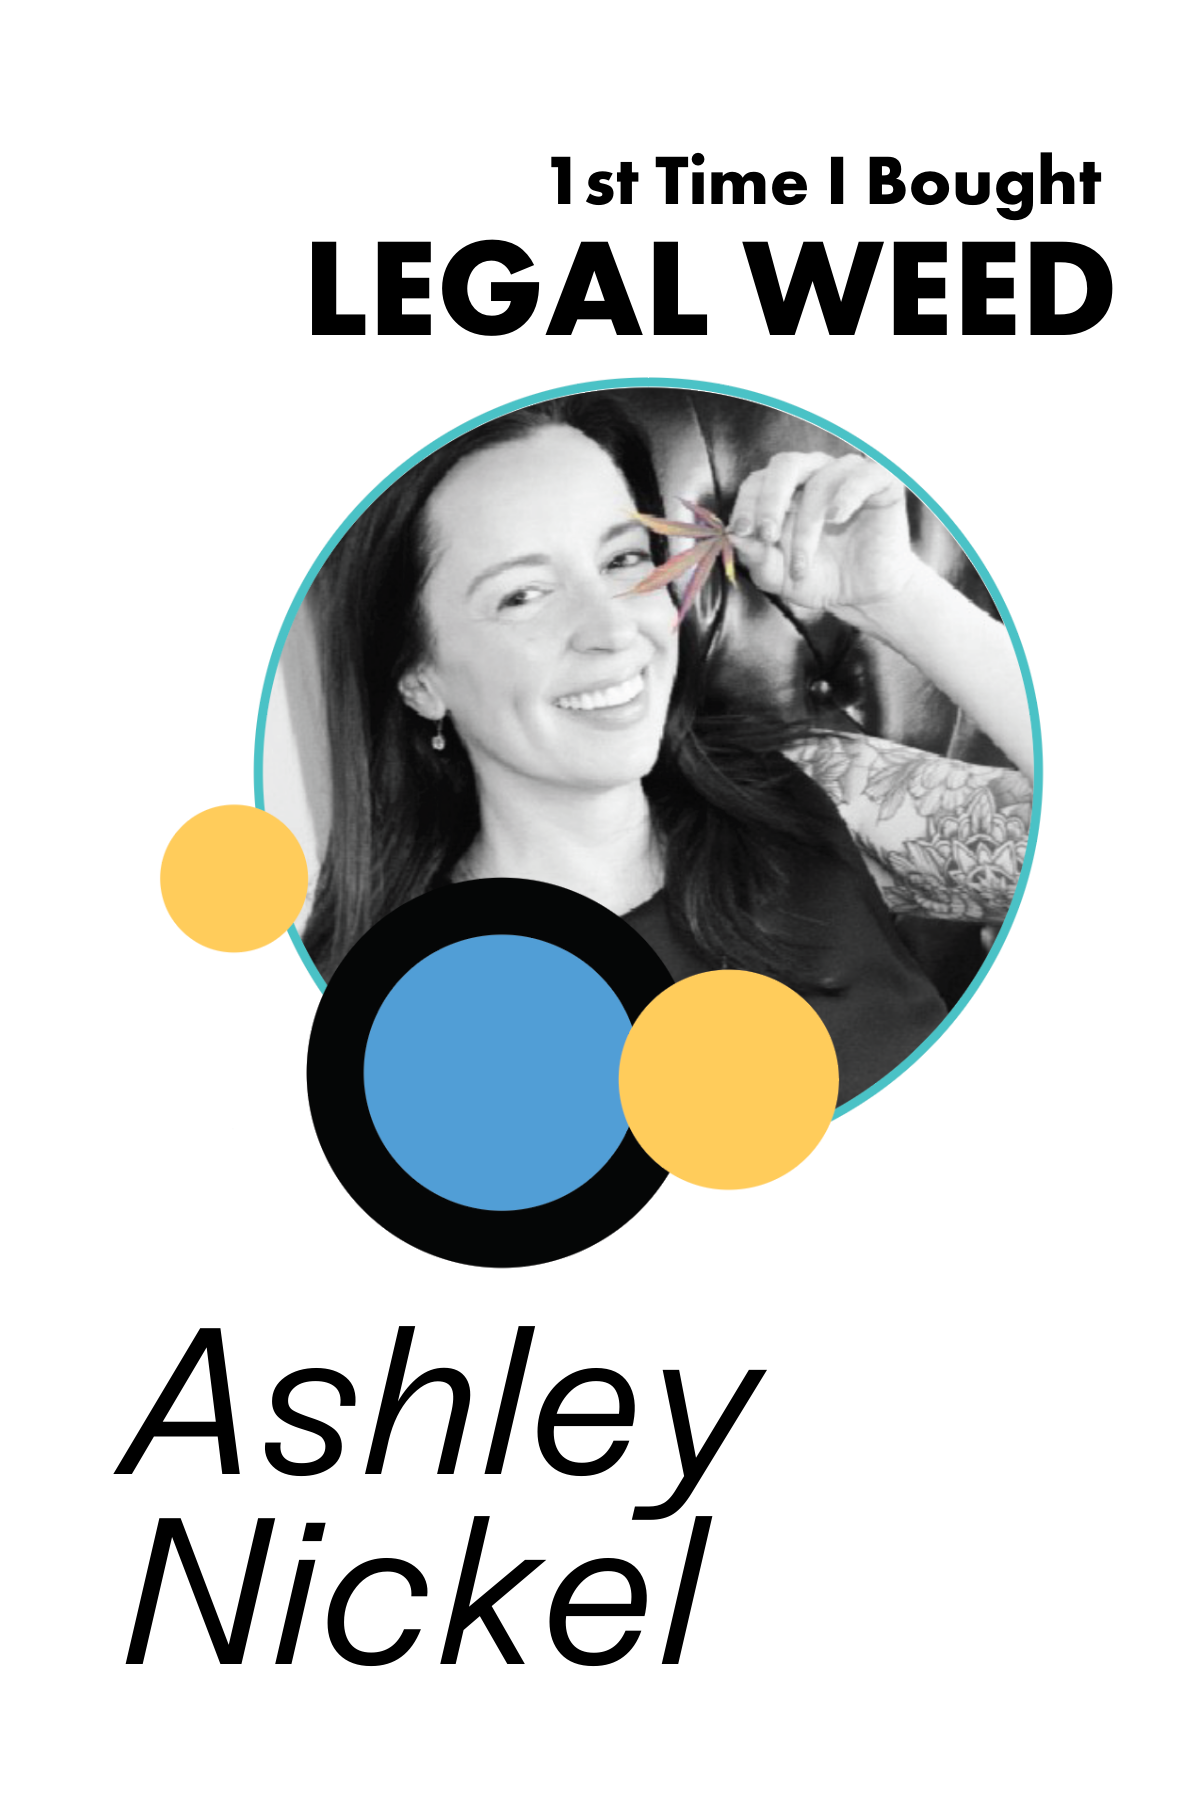 78. The 1st Time I Bought Legal Weed: Ashley Nickel, Host of Cannabis Curious Podcast